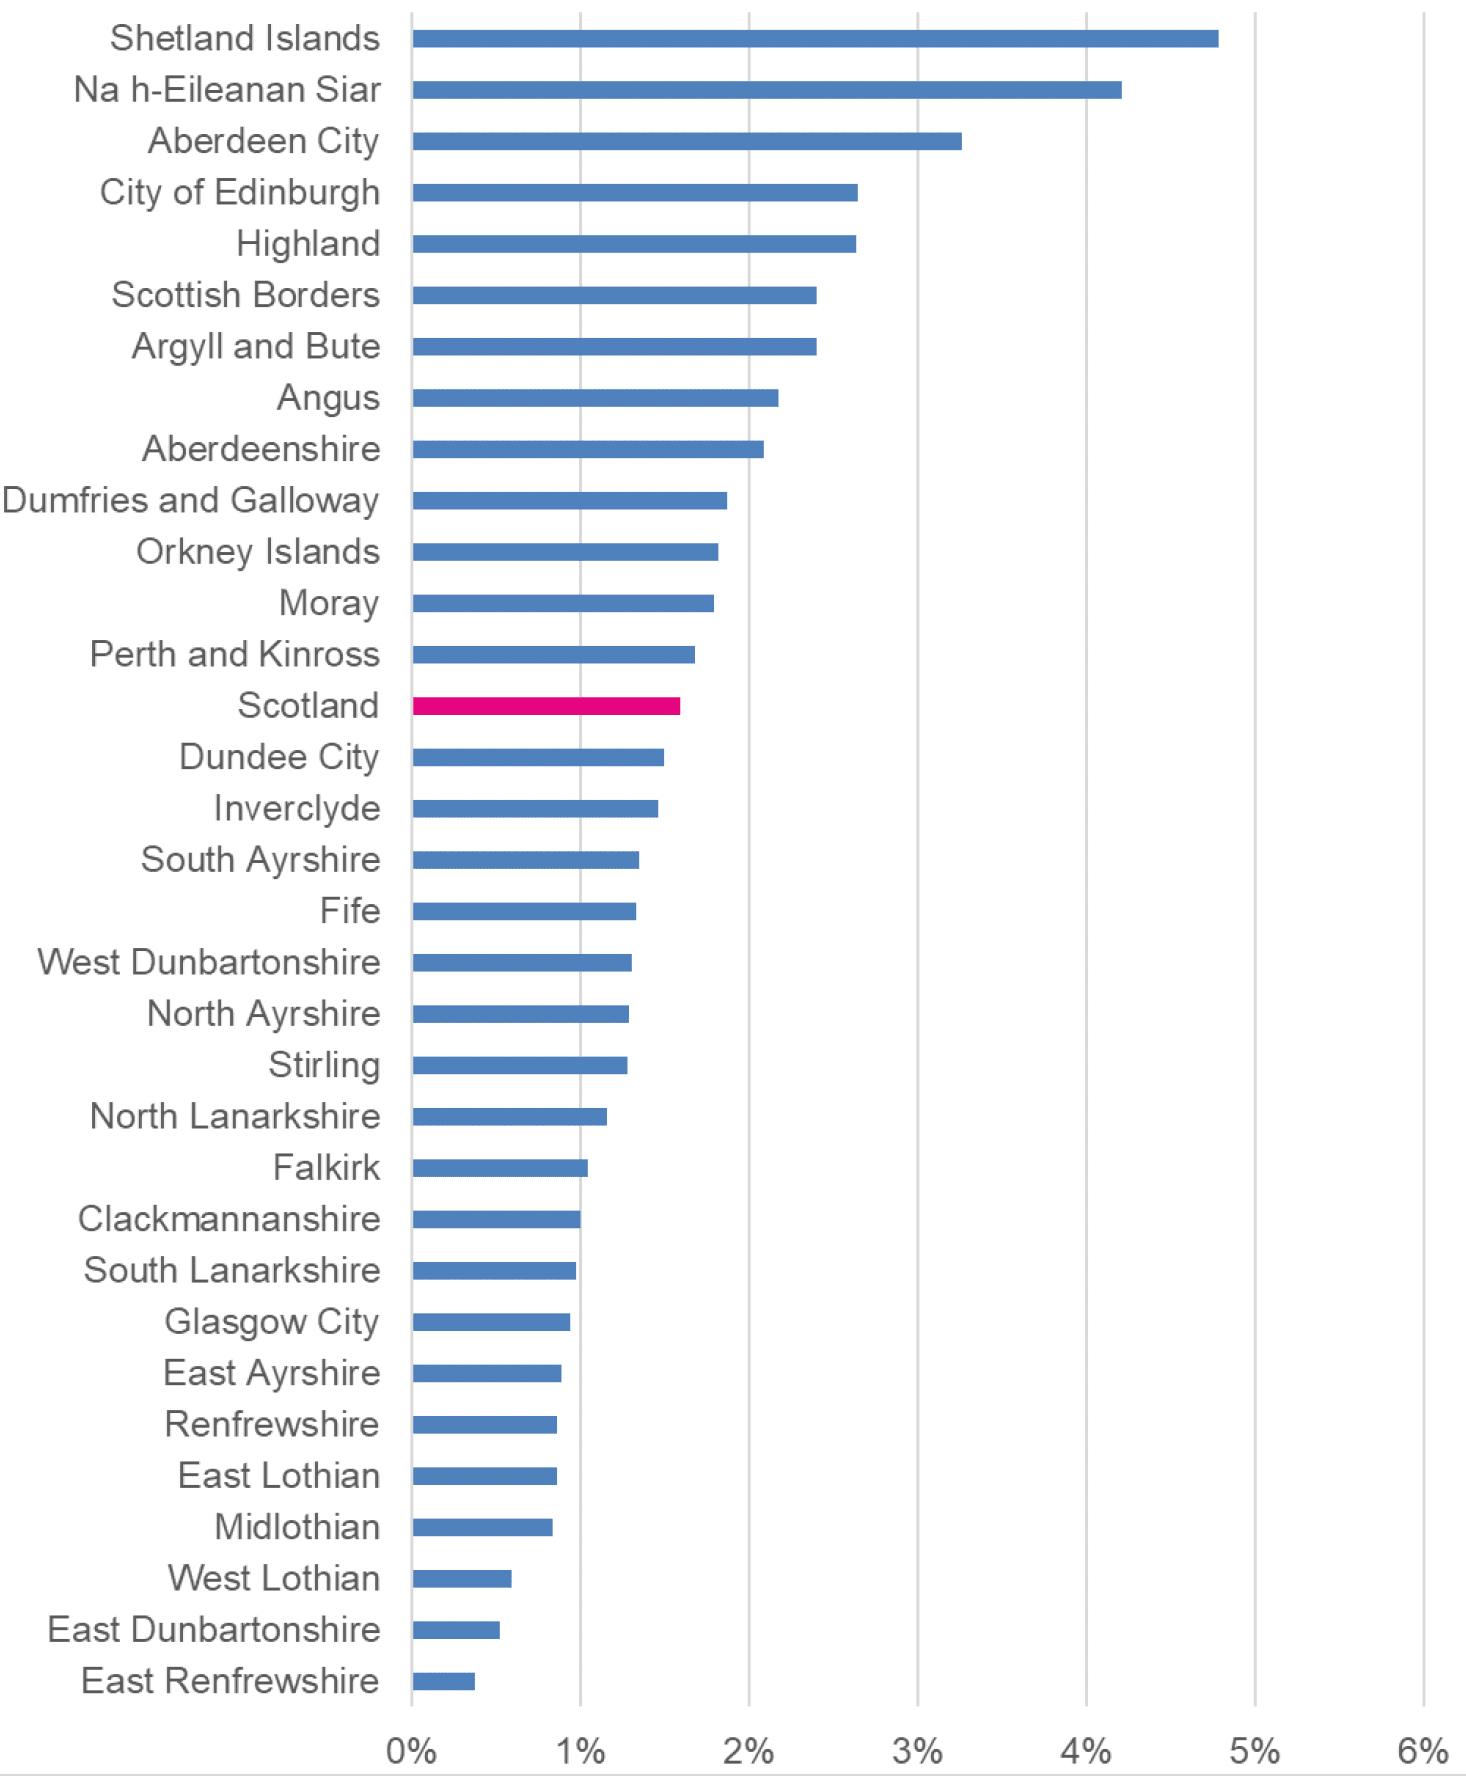 A horizontal bar chart showing the proportion of dwellings that are long-term empty over 6 months in 2022, by local authority. The Shetland Islands have the highest proportion and East Renfrewshire has the lowest.